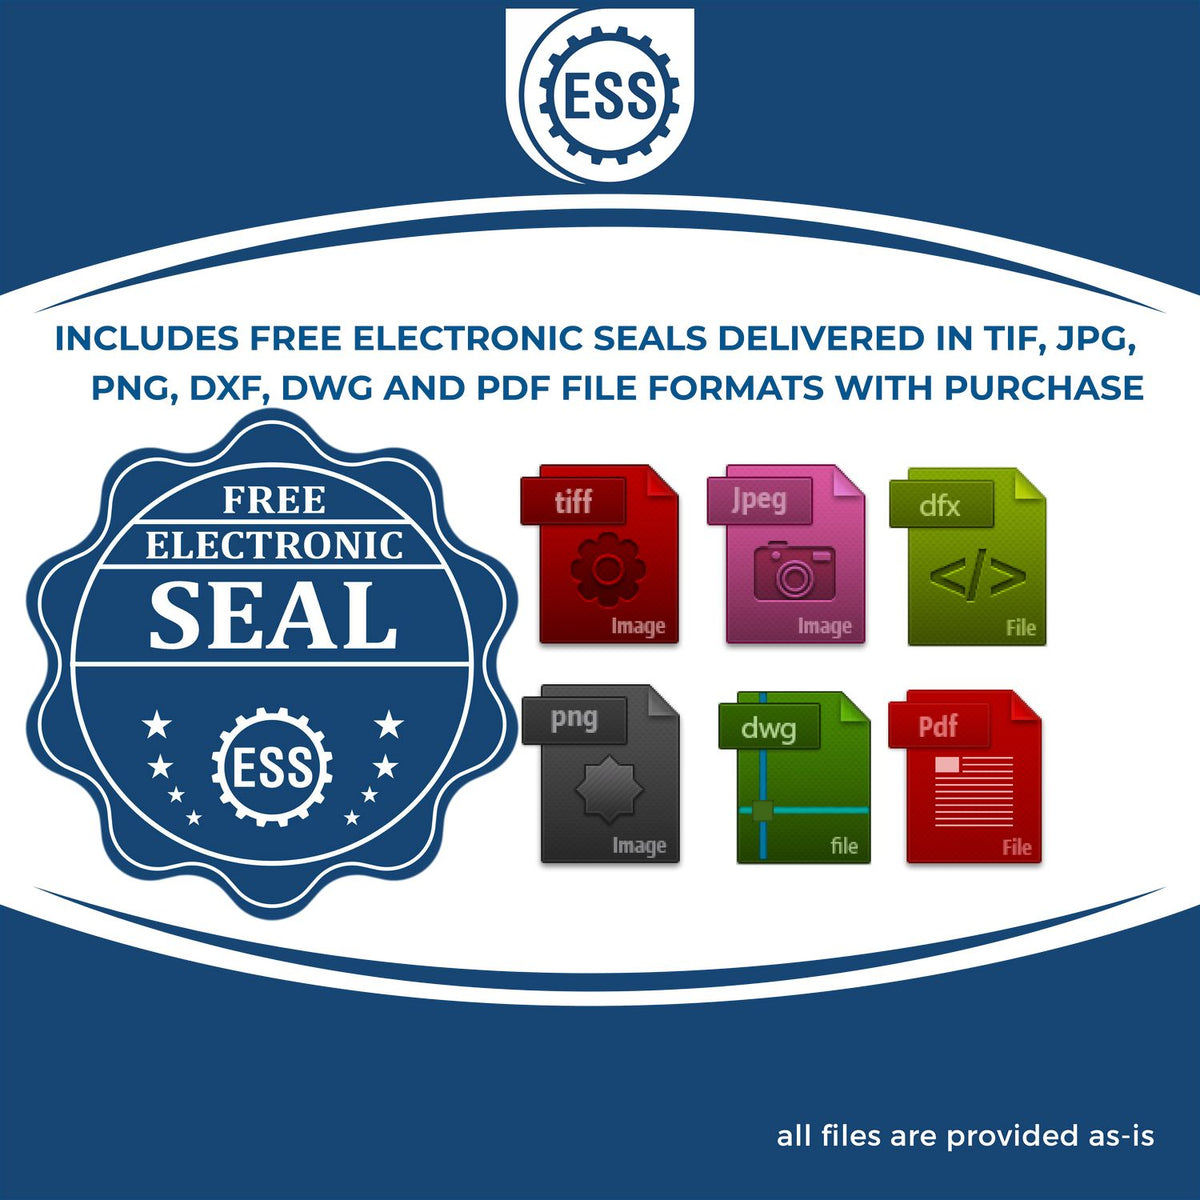 An infographic for the free electronic seal for the North Dakota Geologist Desk Seal illustrating the different file type icons such as DXF, DWG, TIF, JPG and PNG.